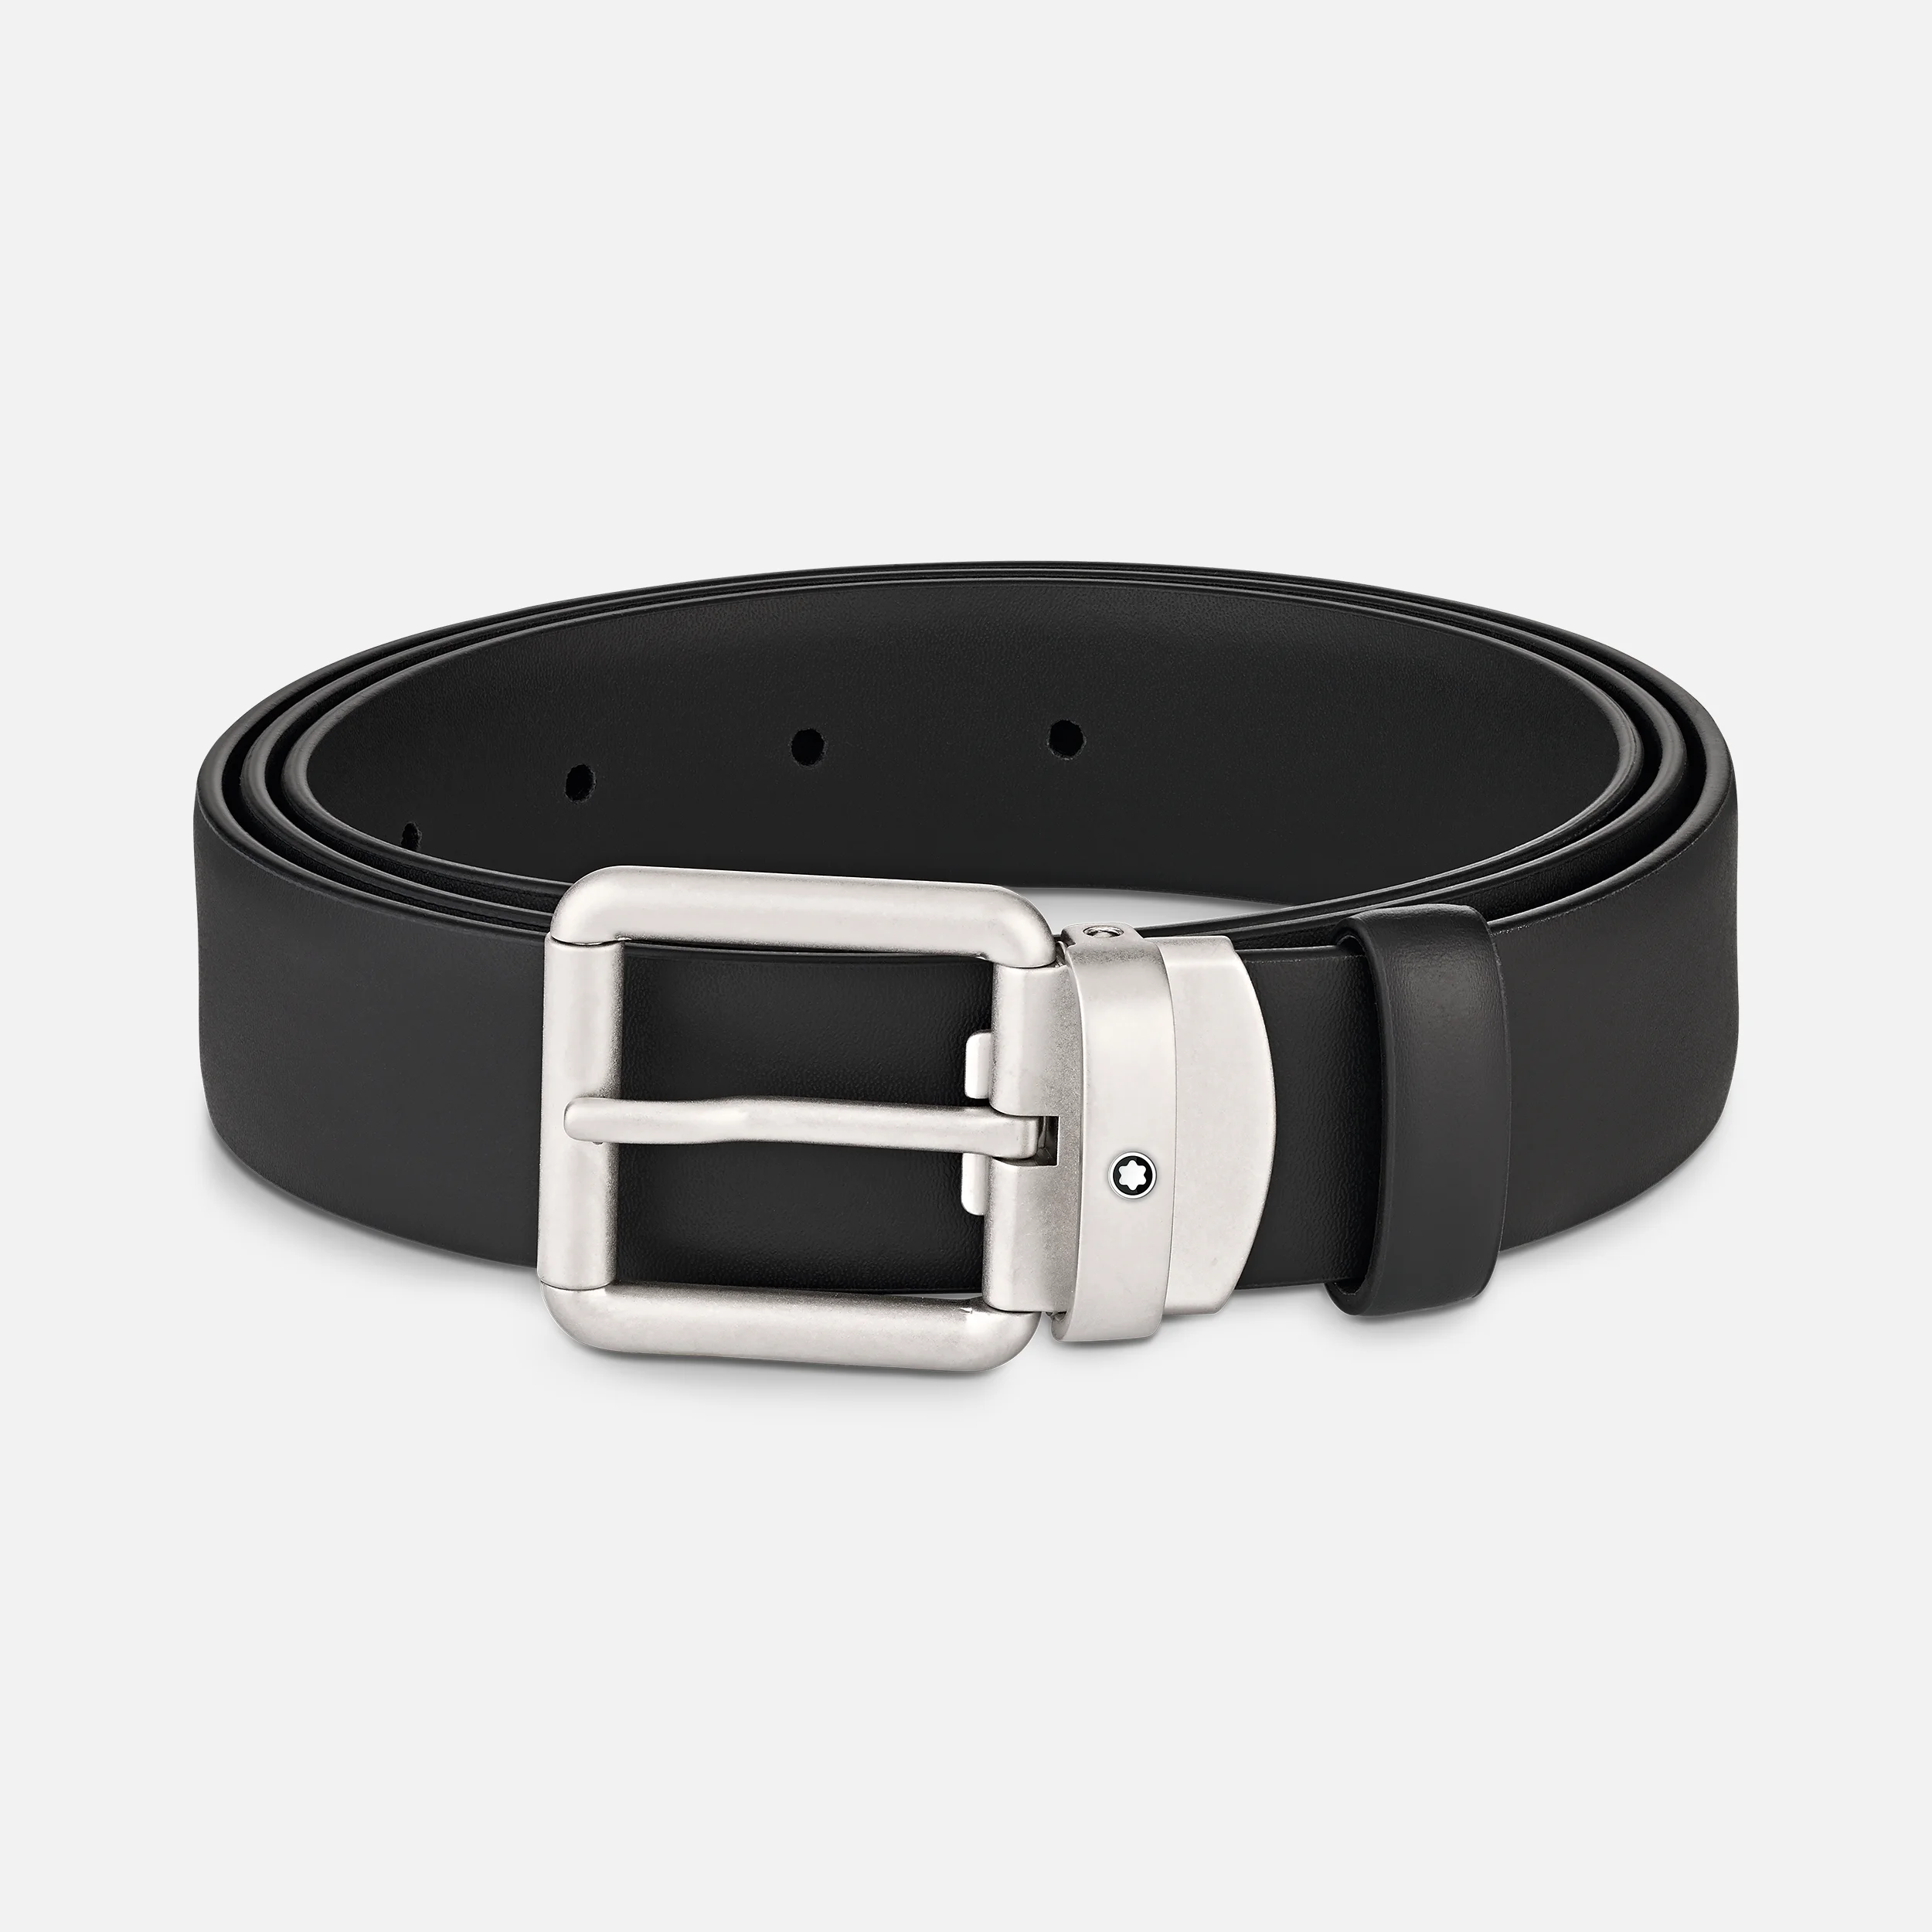 Montblanc Belt Rounded Square Vintage Stainless Steel Buckle Matte Leather Black 30mm - Pencraft the boutique